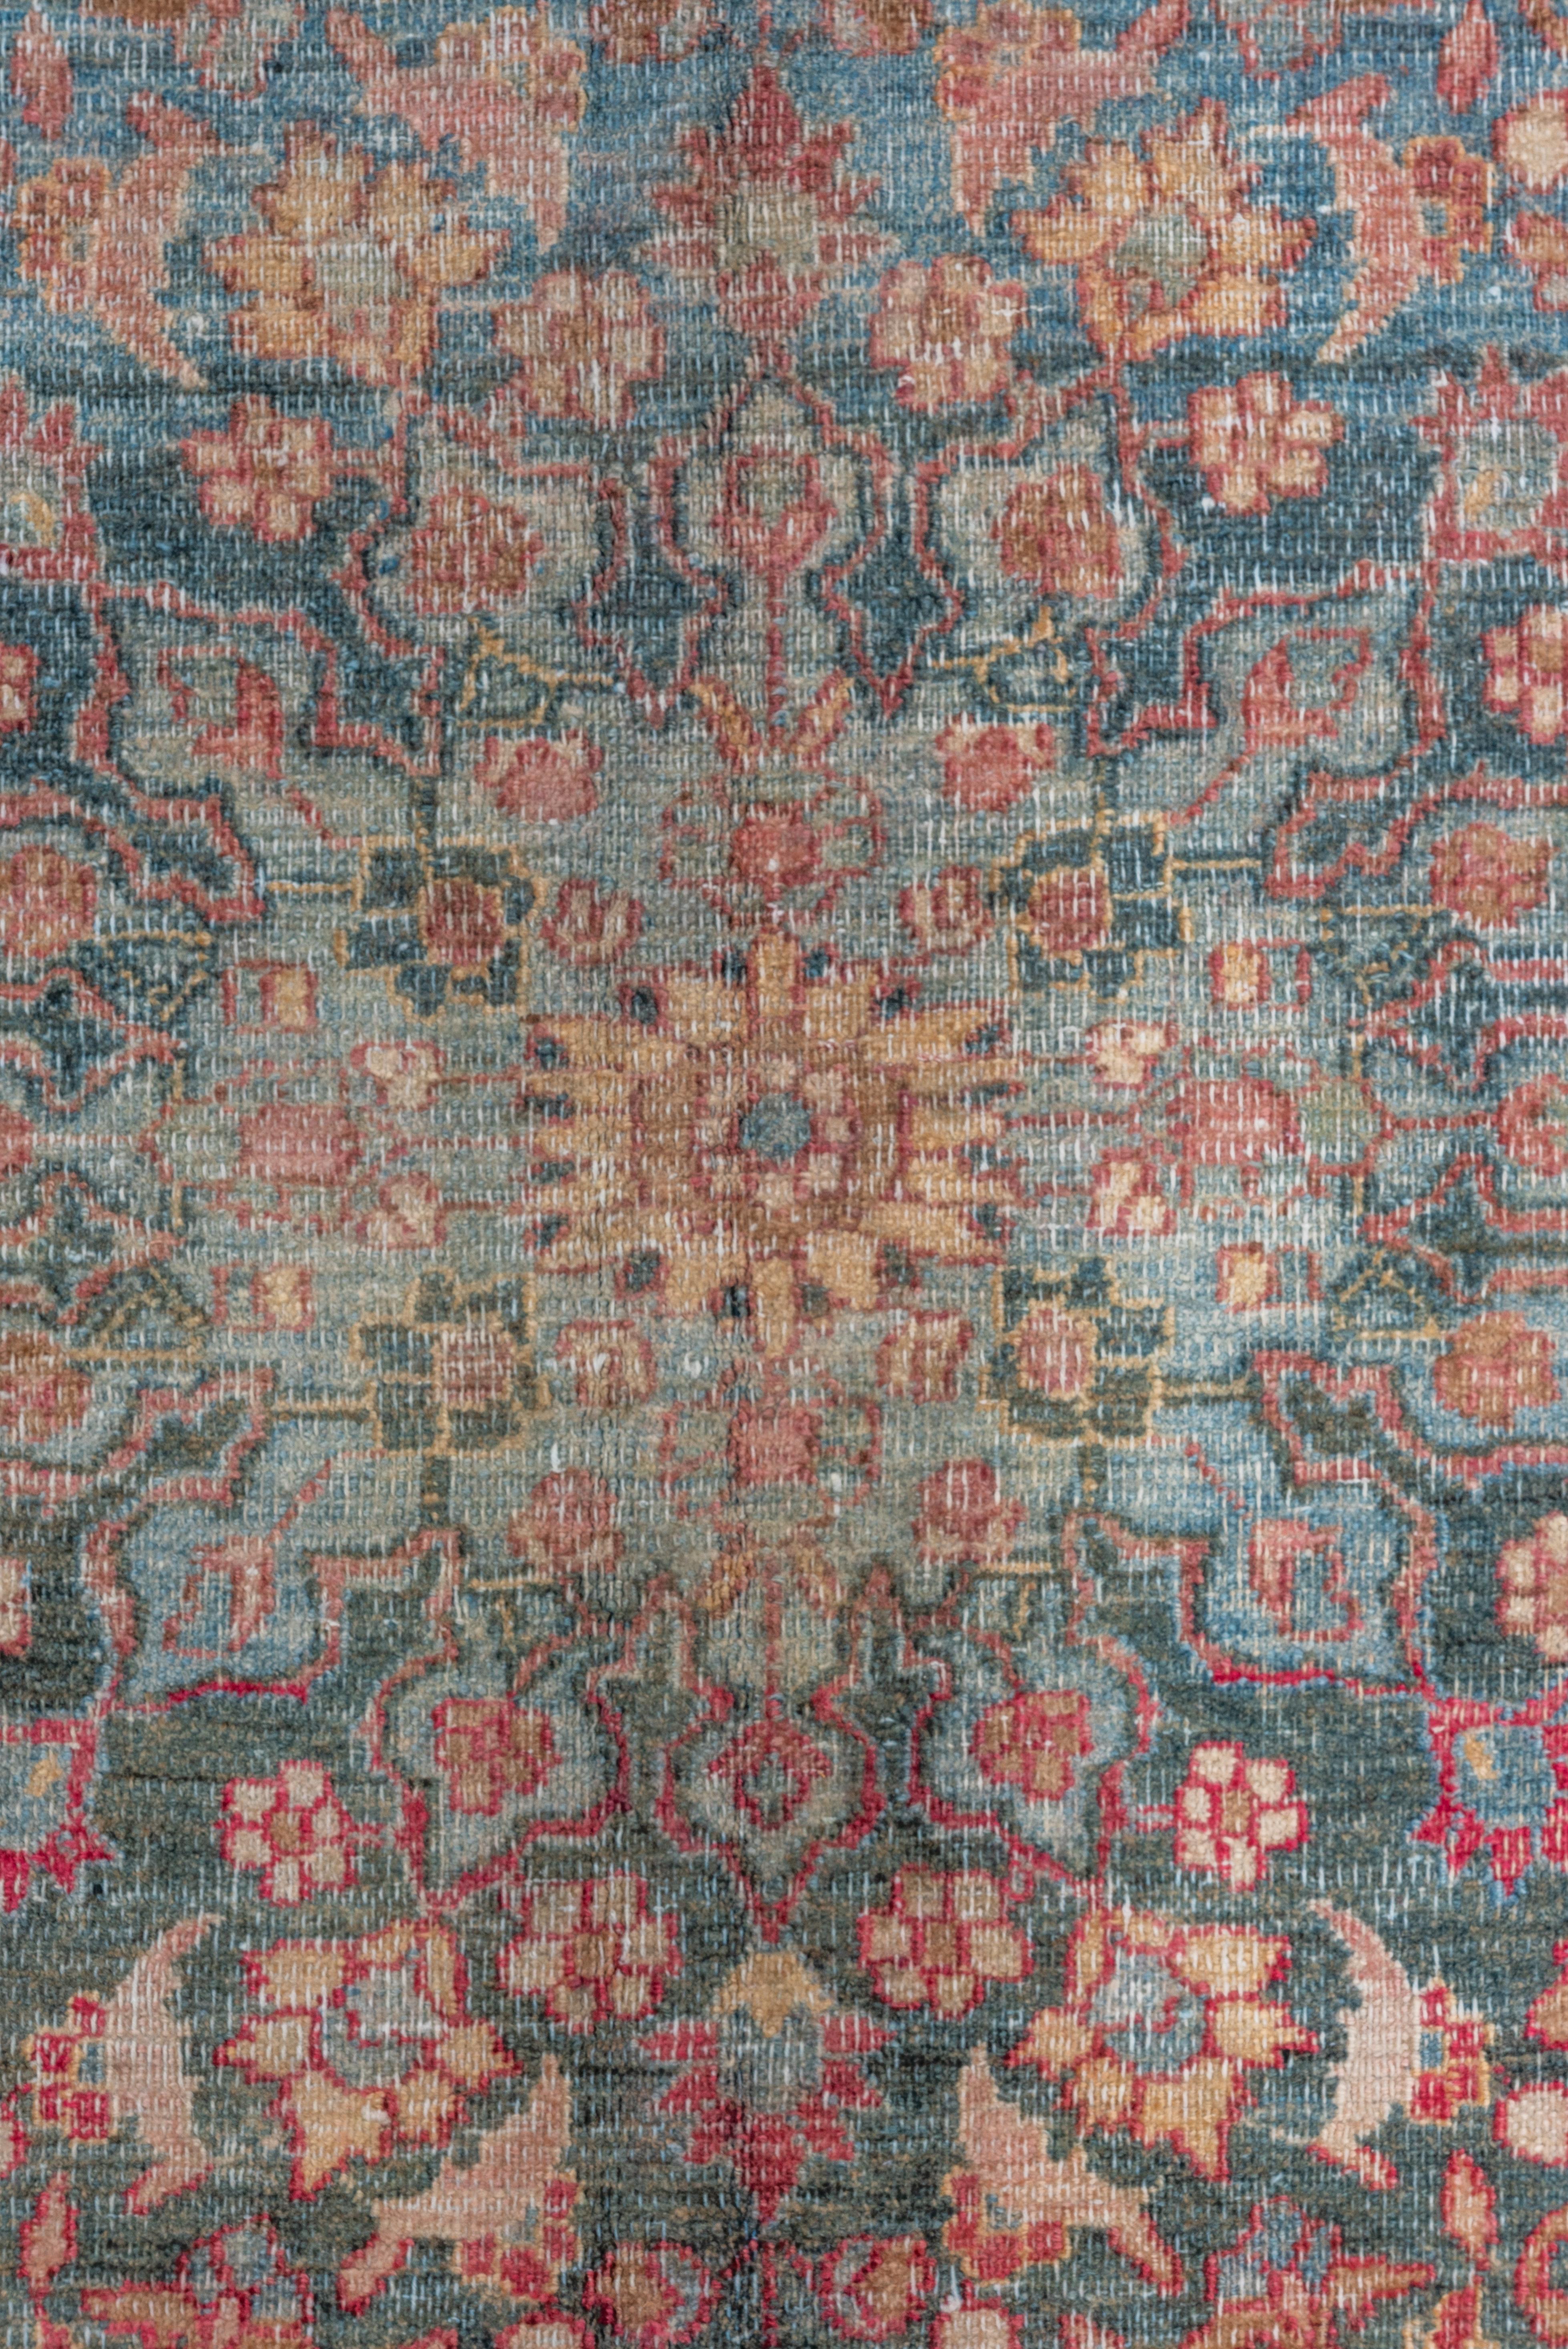 Shabby Chic Persian Khorassan Rug with Pink & Teal Tones, Circa 1930s For Sale 1